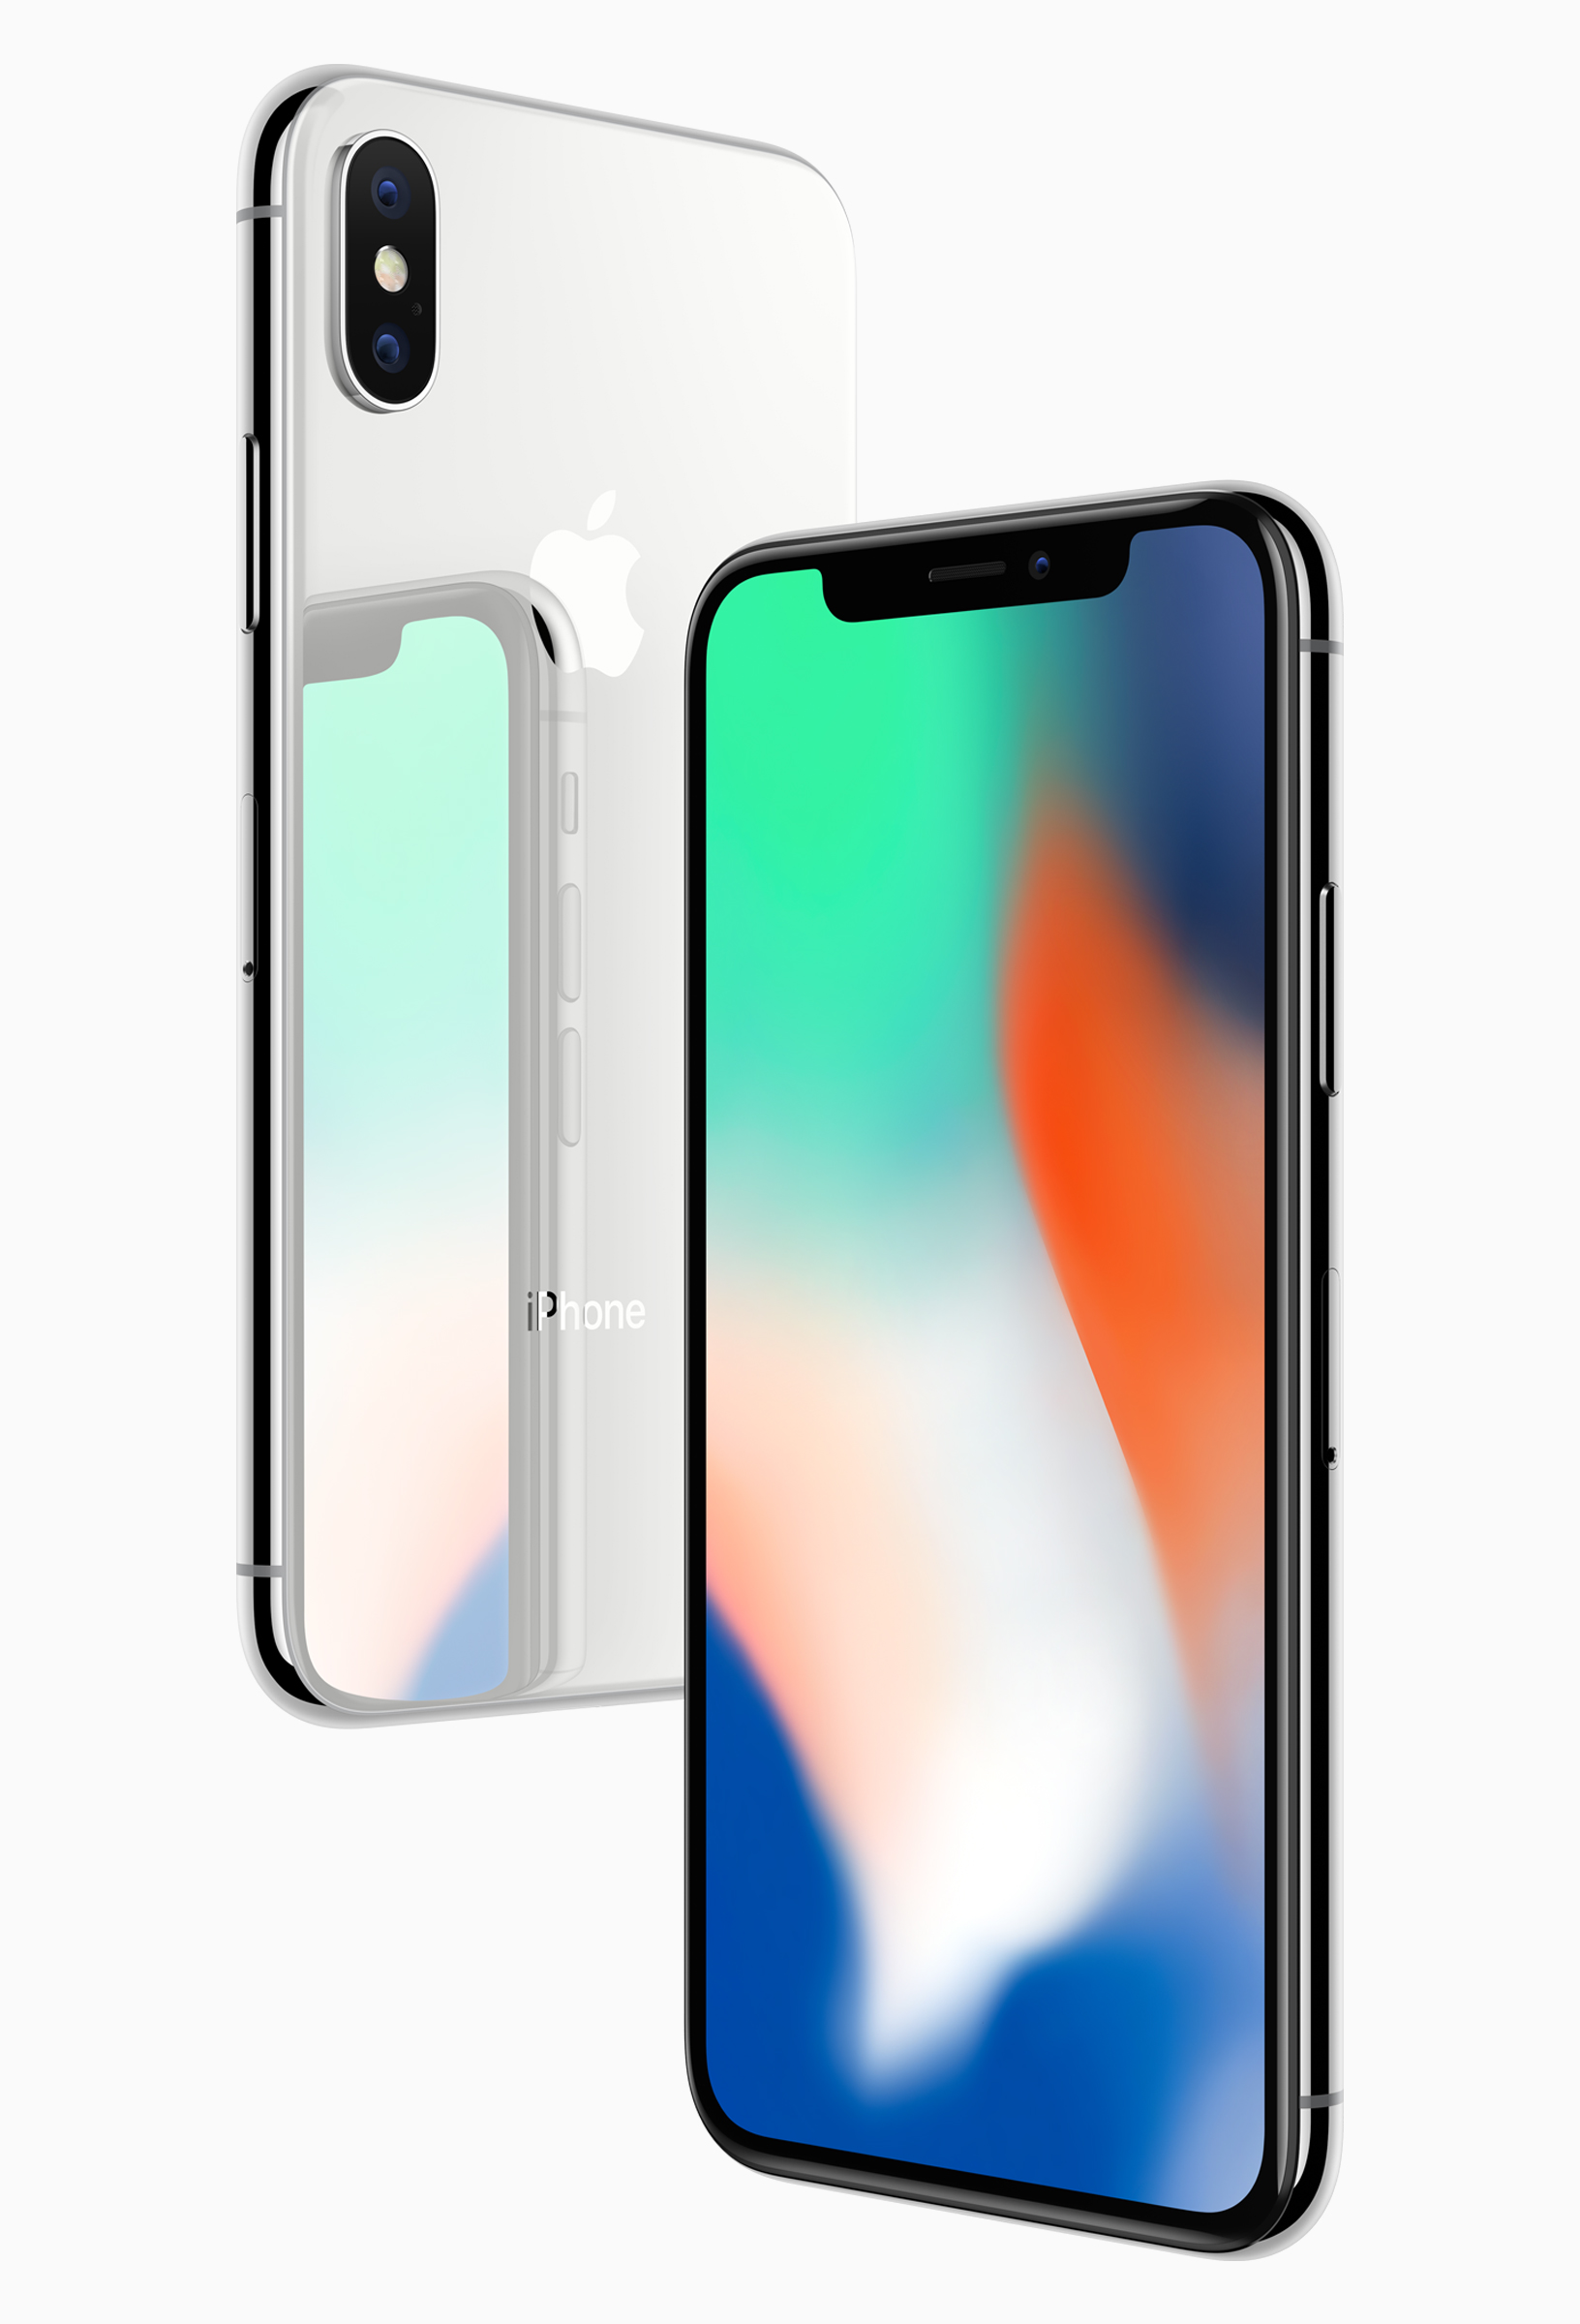 iPhone X front view